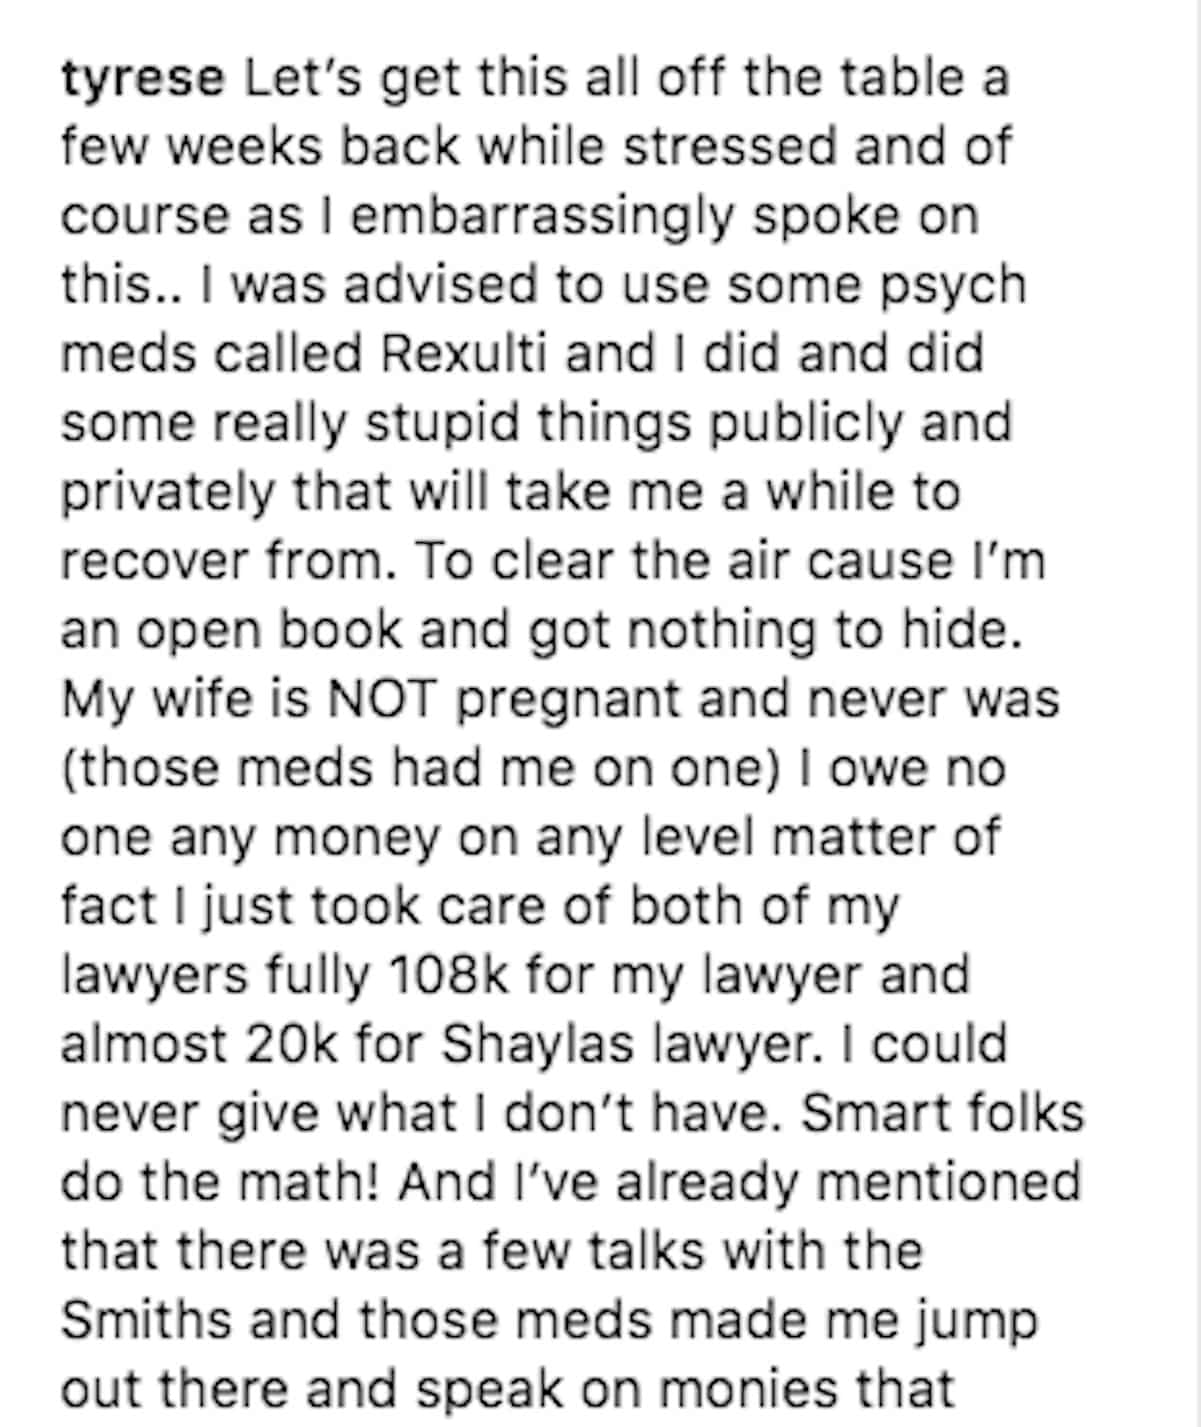 tyrese lied wife pregnant broke 1